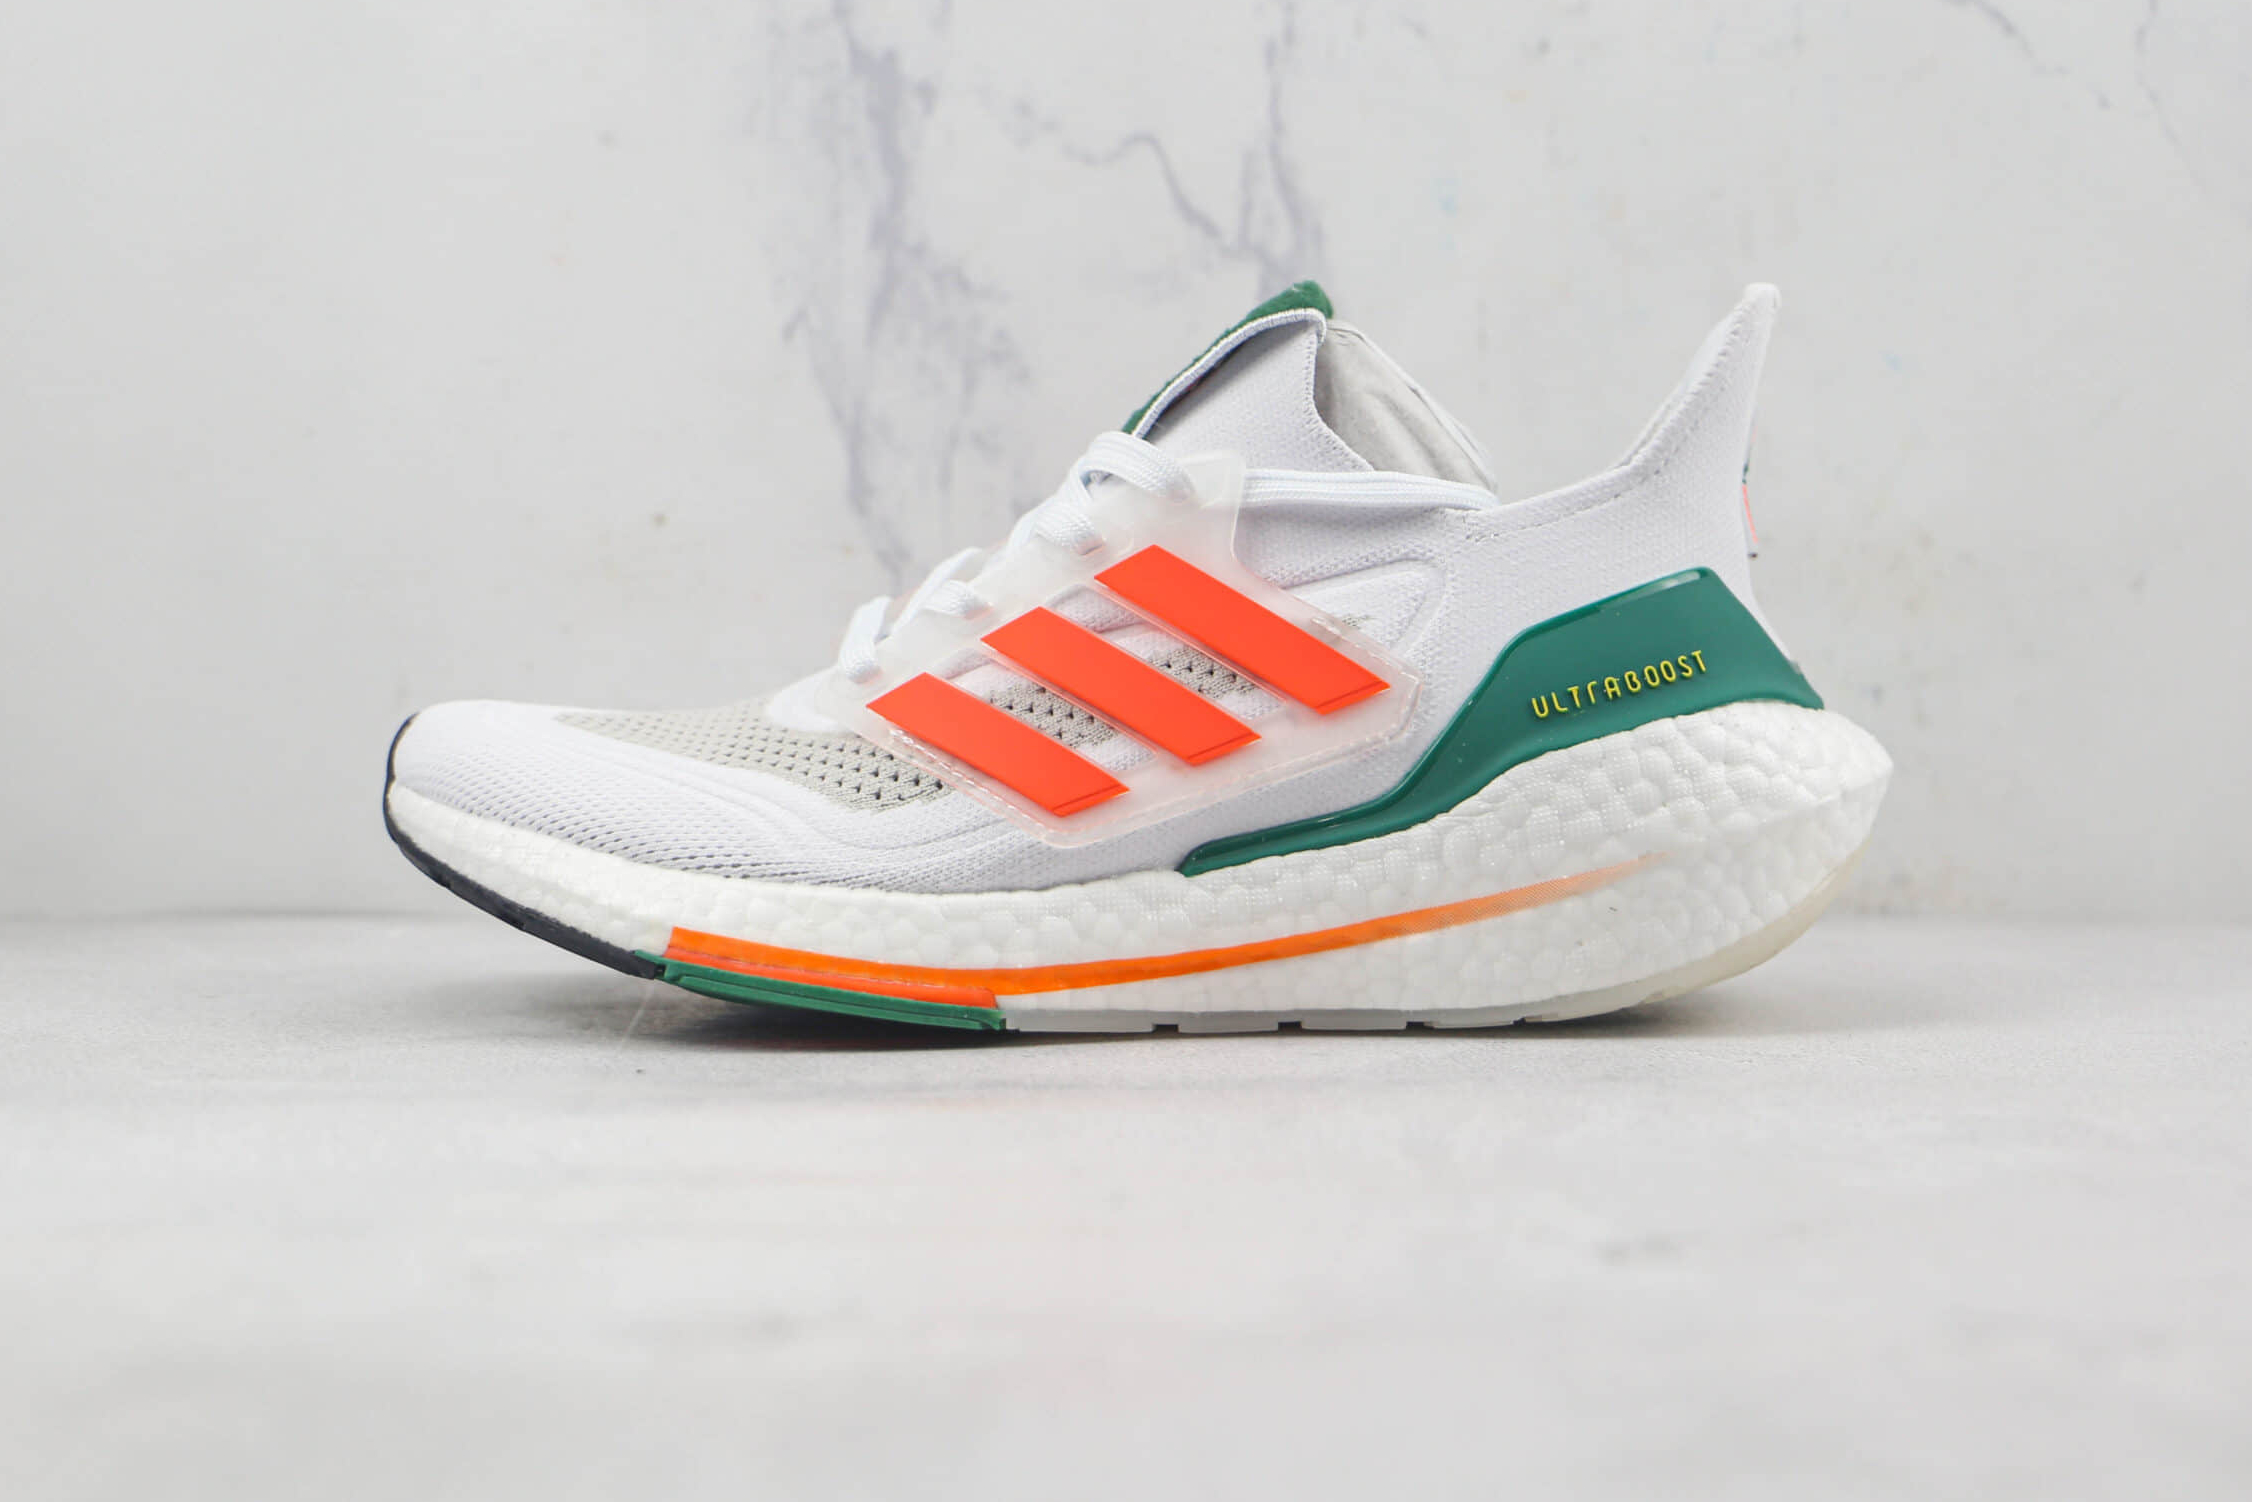 Adidas UltraBoost 21 'NCAA Pack - Miami' GX7966: Premium Running Shoes for Miami Athletics